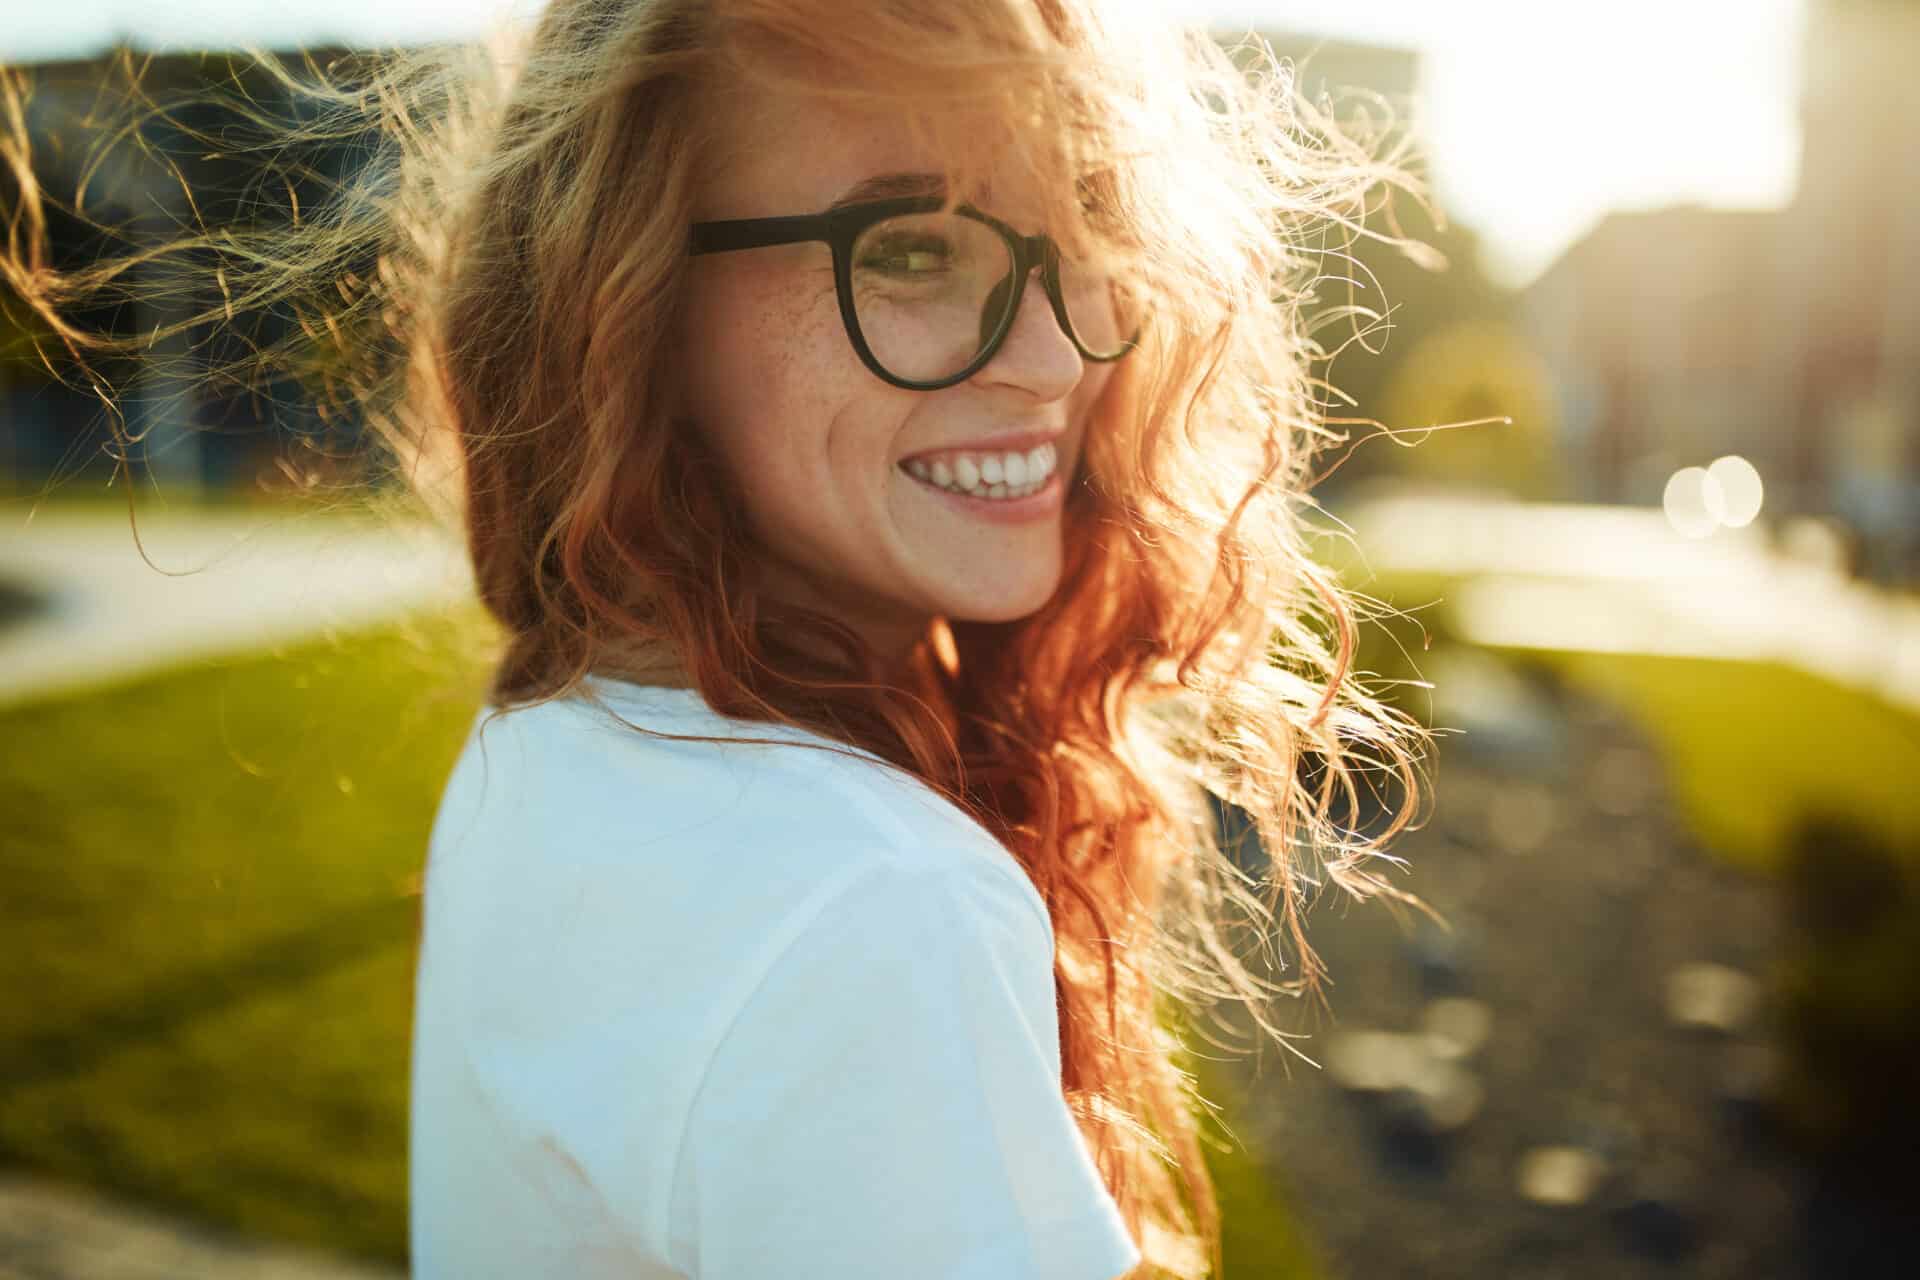 Young woman with glasses, smiling in the city